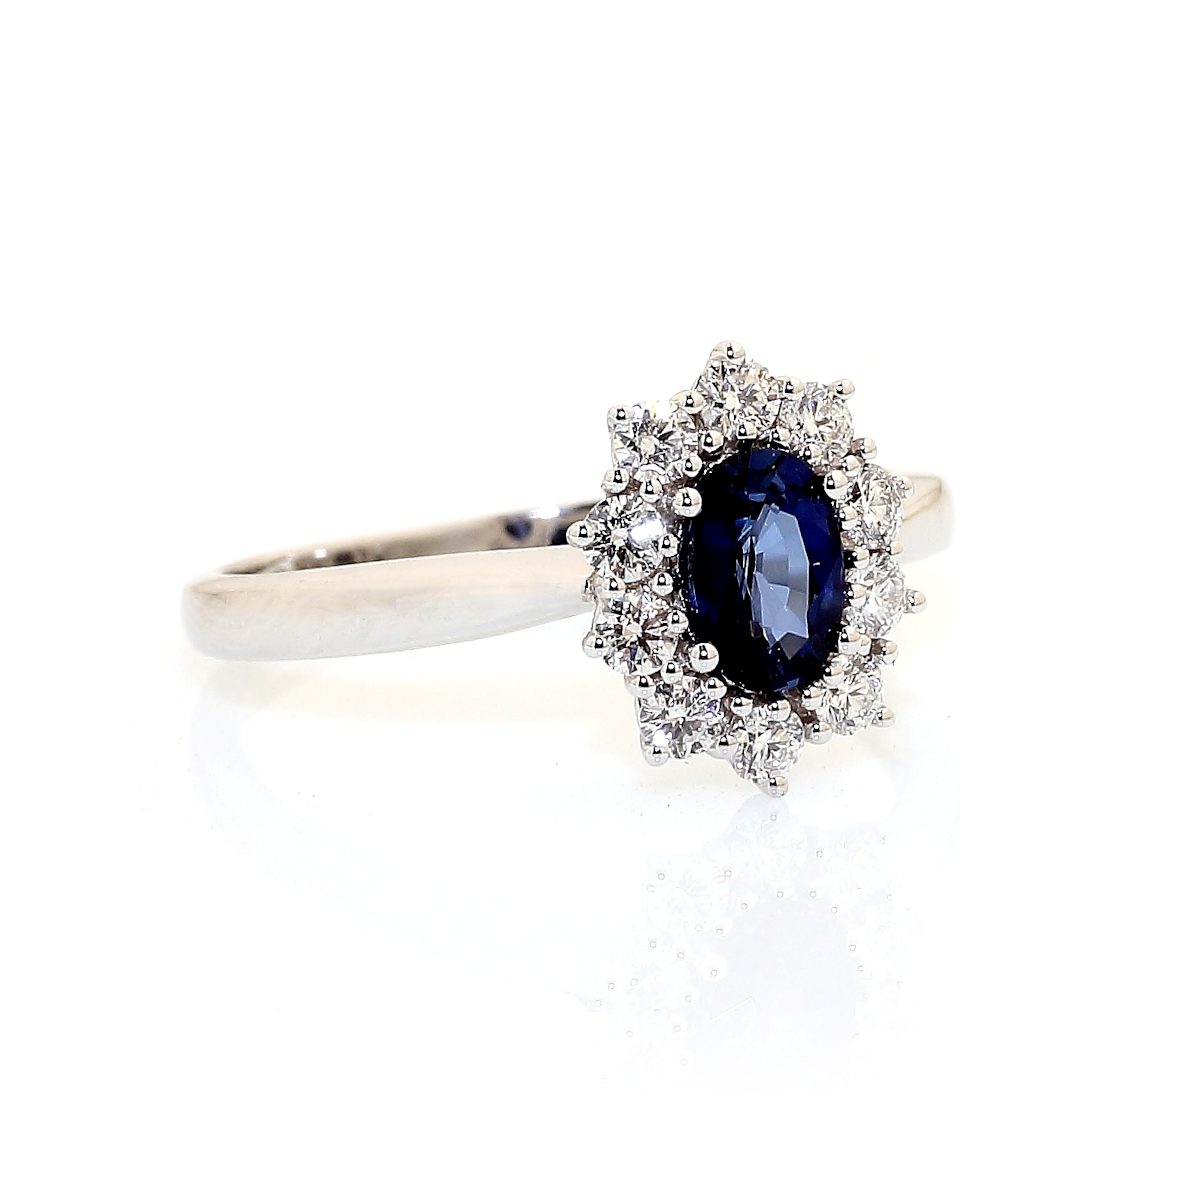 750 Mill. White Gold Ring with 0,37 Ct. Diamonds and 0,60 Ct. Sapphire